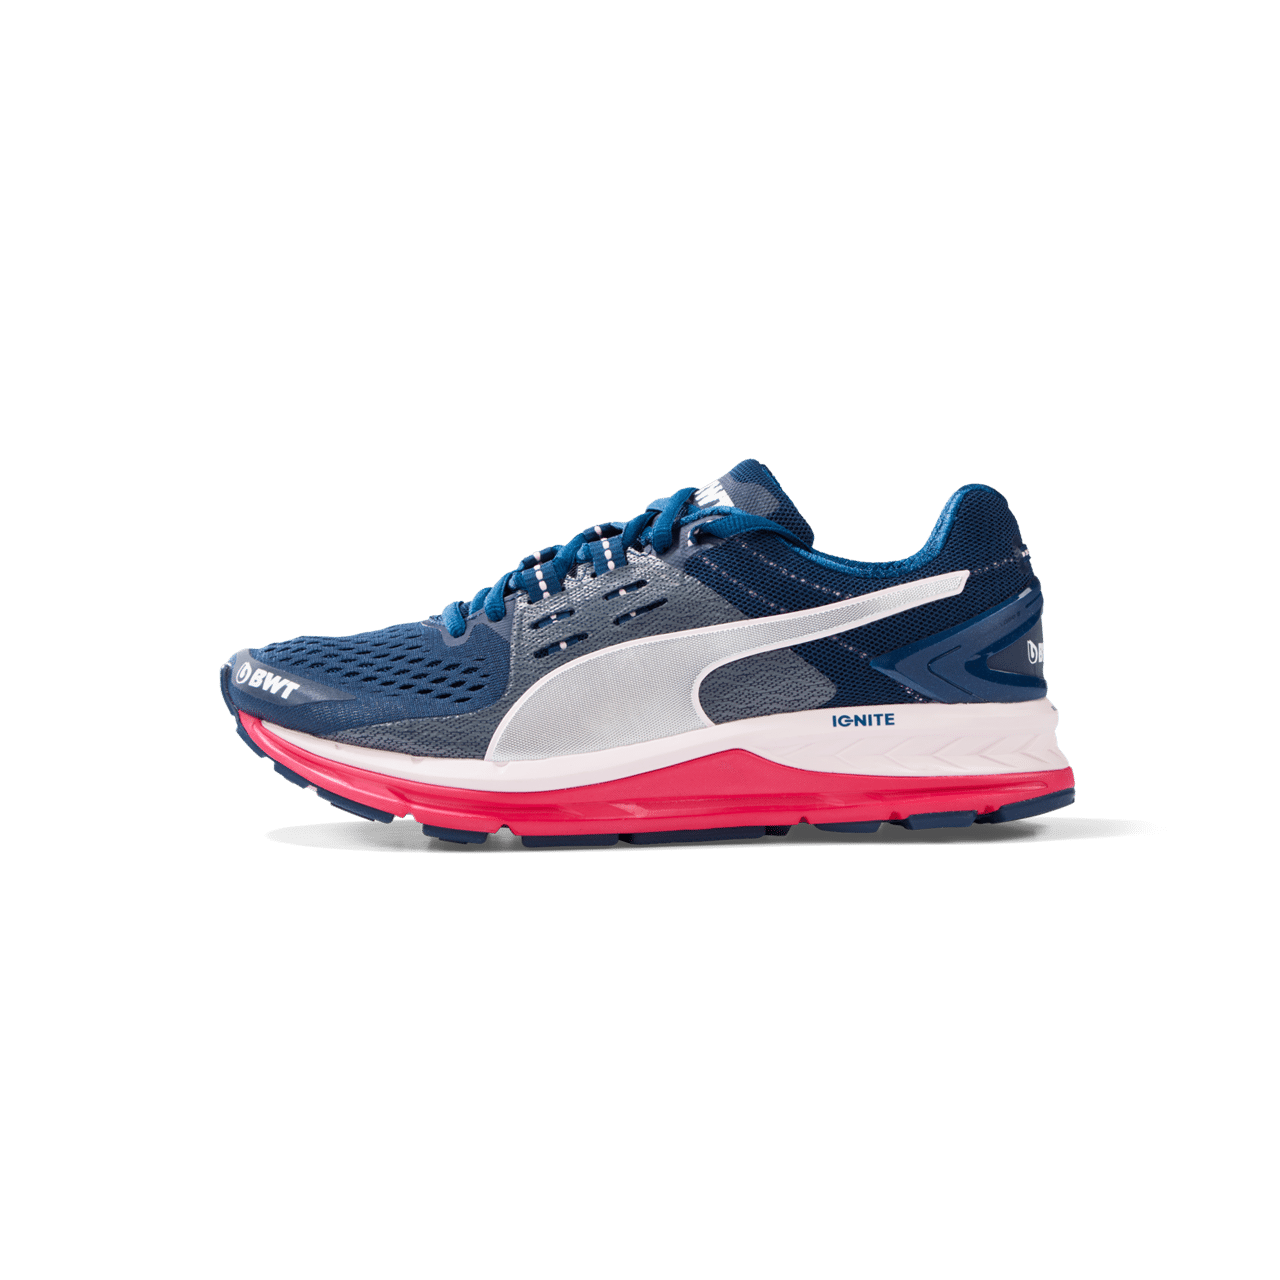 BWT running shoe in blue, white and pink design